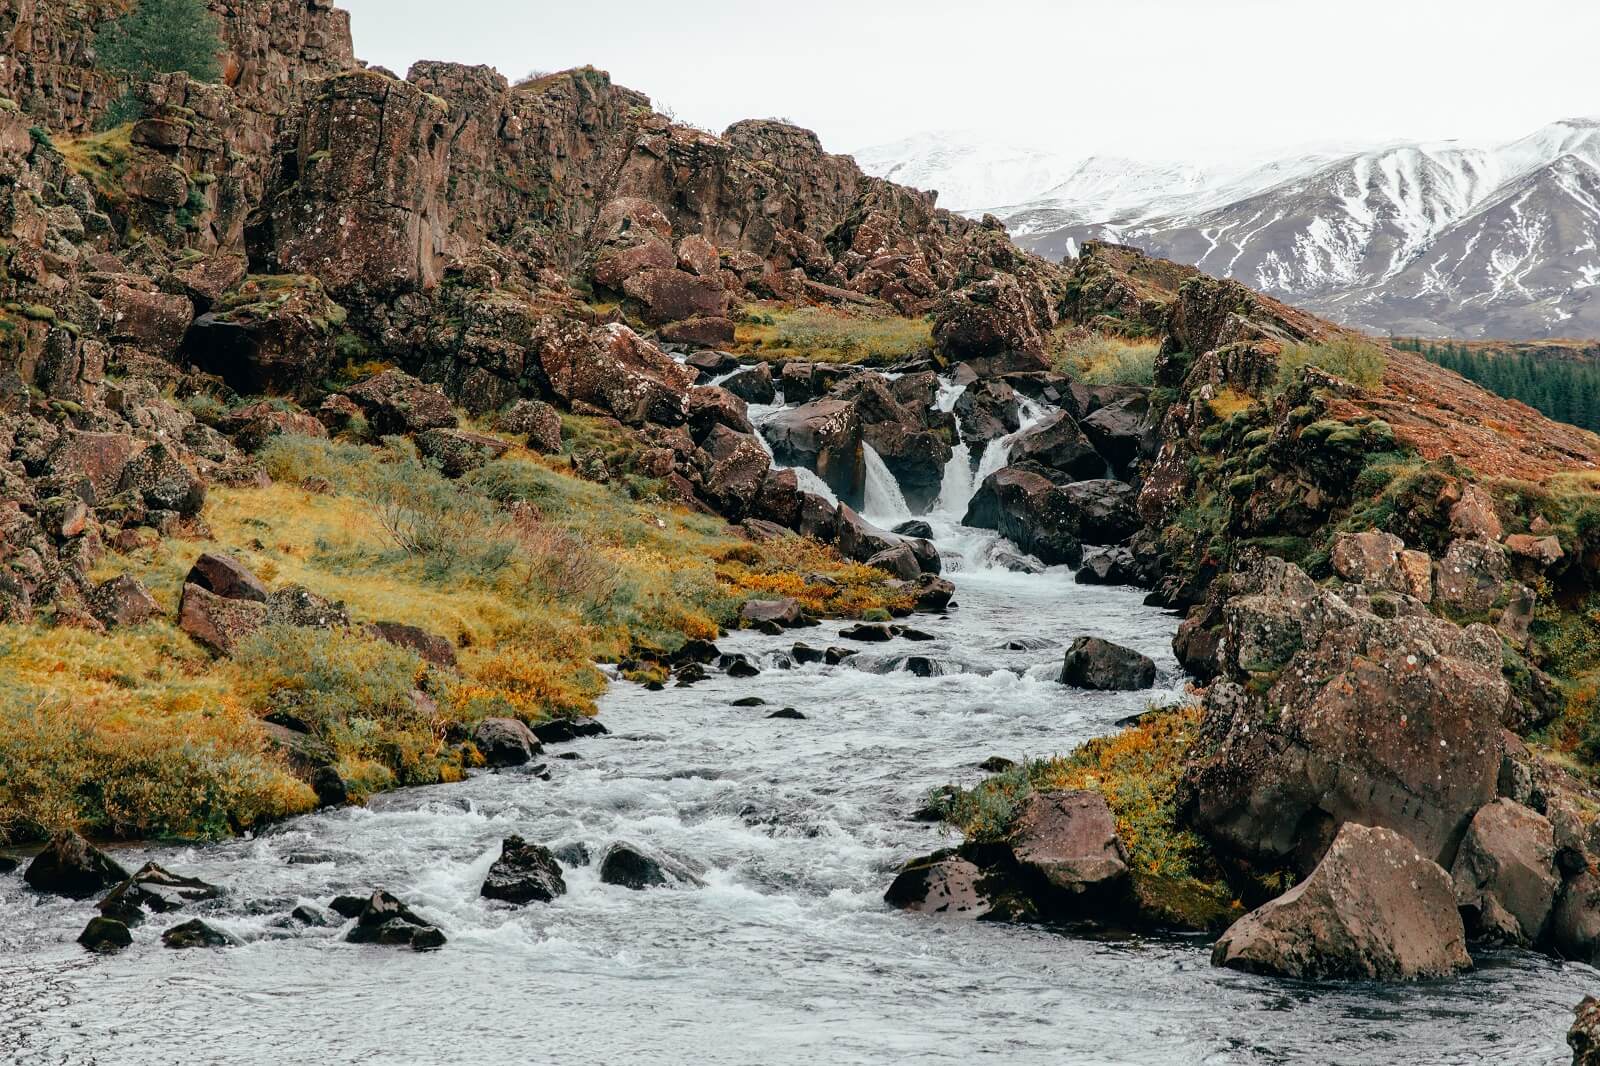 A stream tumbles over boulders in Þingvellir National Park in south Iceland.